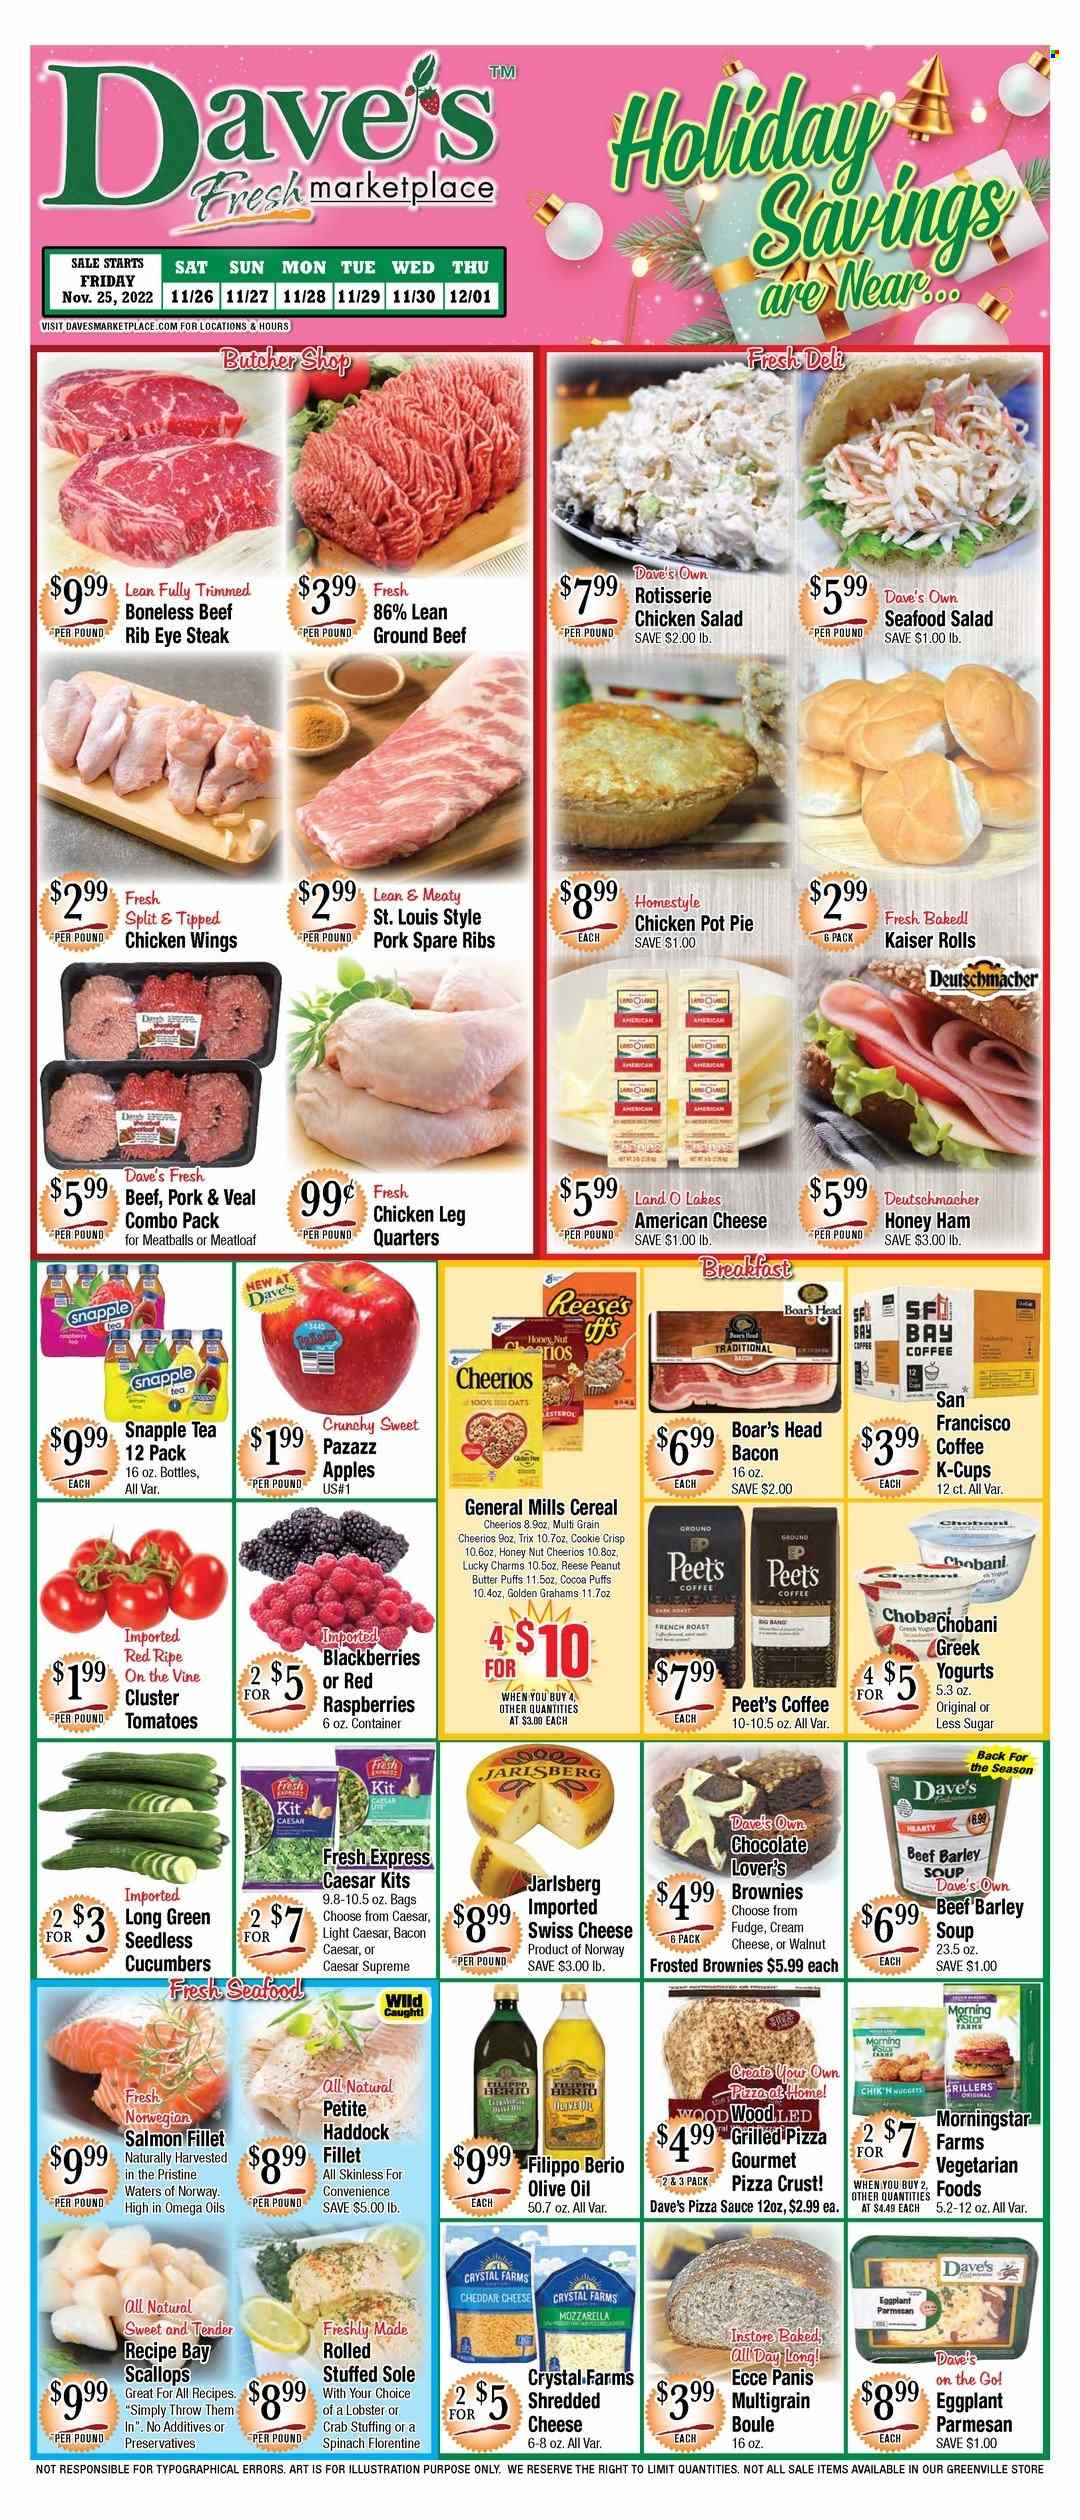 thumbnail - Dave's Fresh Marketplace Flyer - 11/25/2022 - 12/01/2022 - Sales products - pot pie, puffs, brownies, eggplant, apples, blackberries, lobster, salmon, salmon fillet, scallops, haddock, seafood, crab, meatballs, soup, nuggets, sauce, meatloaf, ham, seafood salad, chicken salad, american cheese, swiss cheese, cheddar, parmesan, Chobani, Reese's, chicken wings, fudge, chocolate, oats, cereals, Cheerios, Trix, olive oil, oil, peanut butter, Snapple, tea, coffee, coffee capsules, K-Cups, chicken legs, beef meat, ground beef, steak, ribeye steak, pork meat, pork ribs, pork spare ribs, pot, Go!. Page 1.